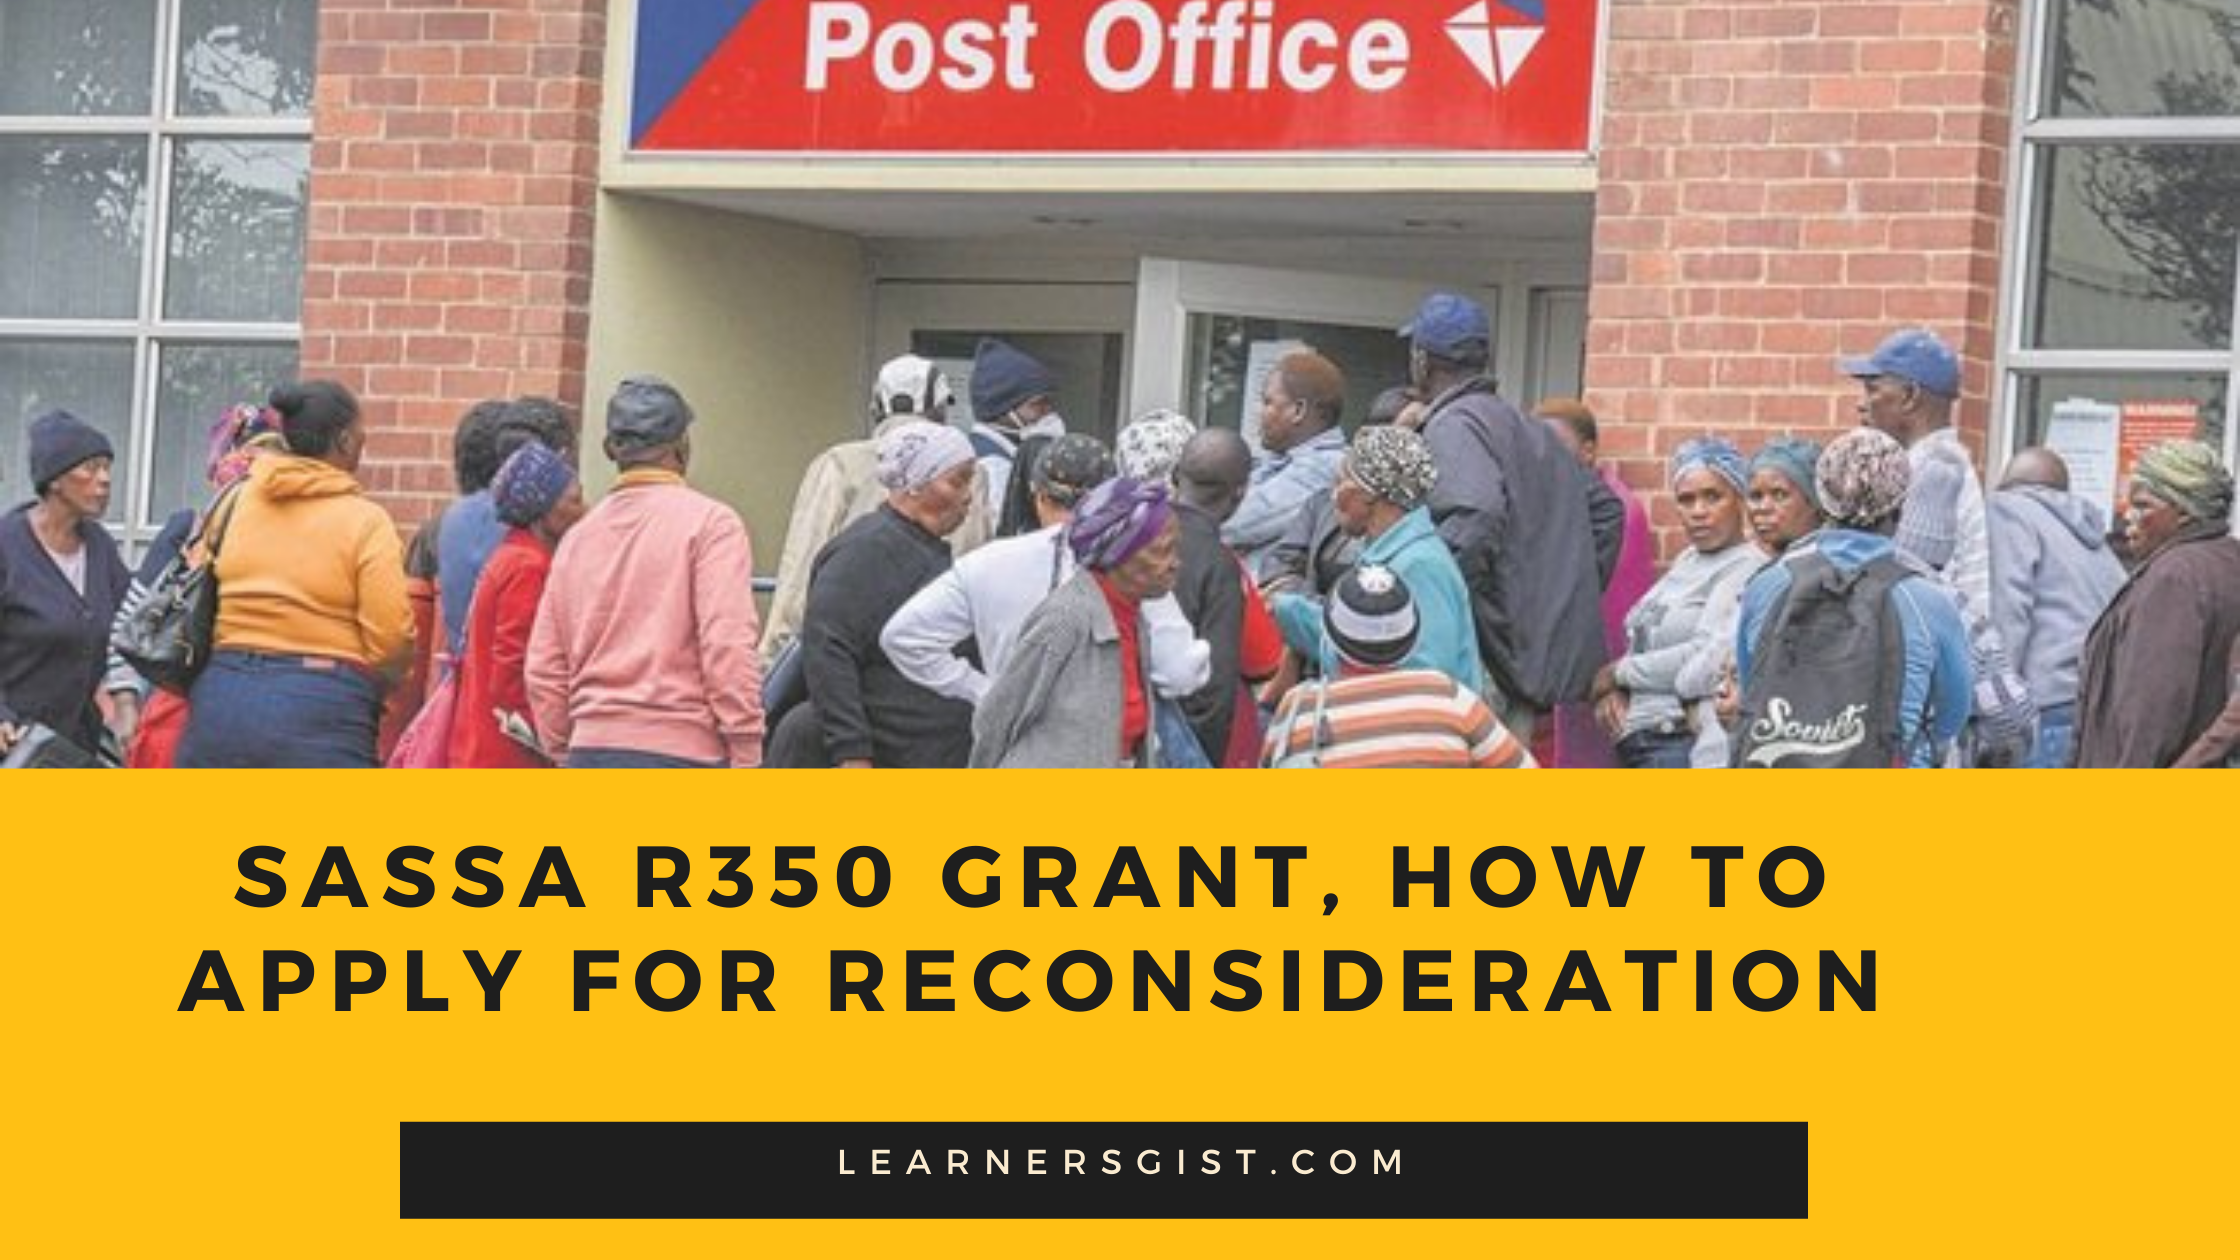 Sassa R350 Grant, How to apply For Reconsideration